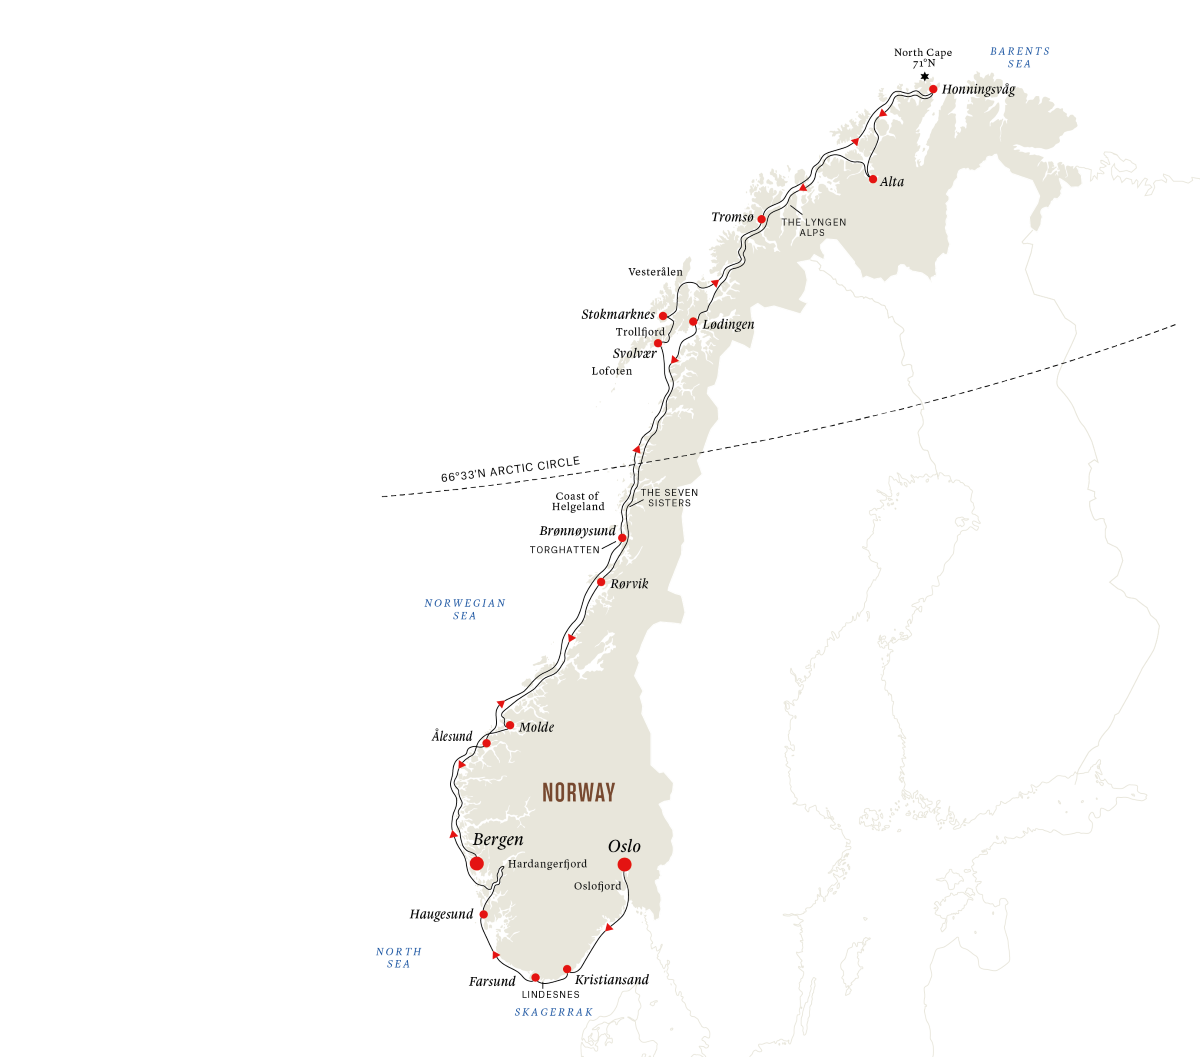 The North Cape Express - Full Voyage from Oslo to Bergen